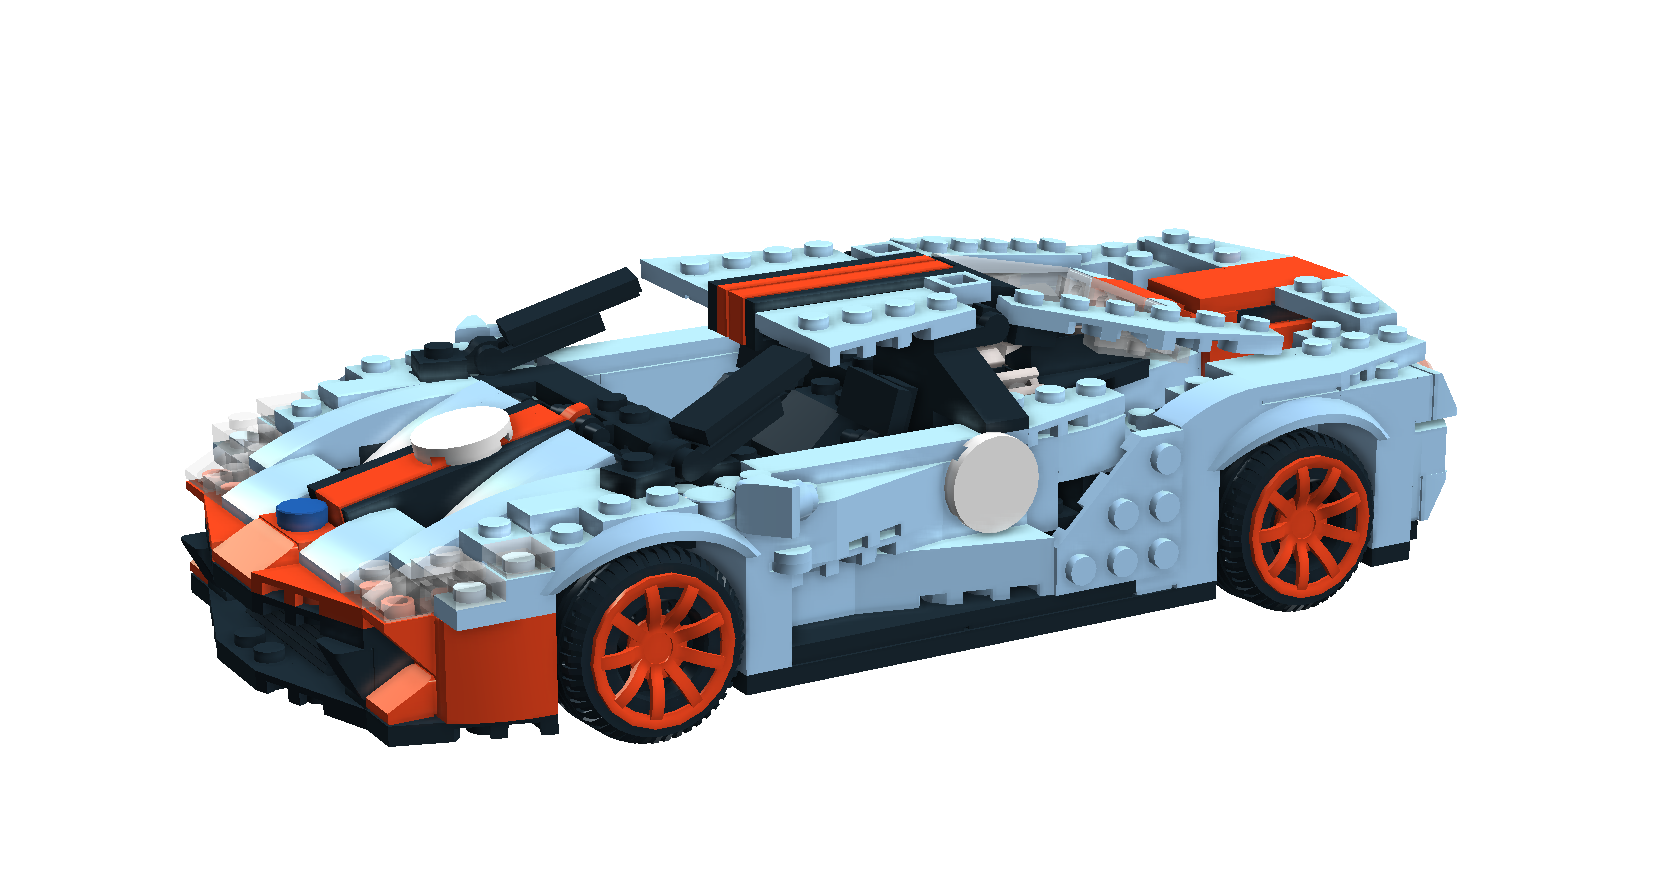 ford_gt_mk2_supercar_2015_gulf.png